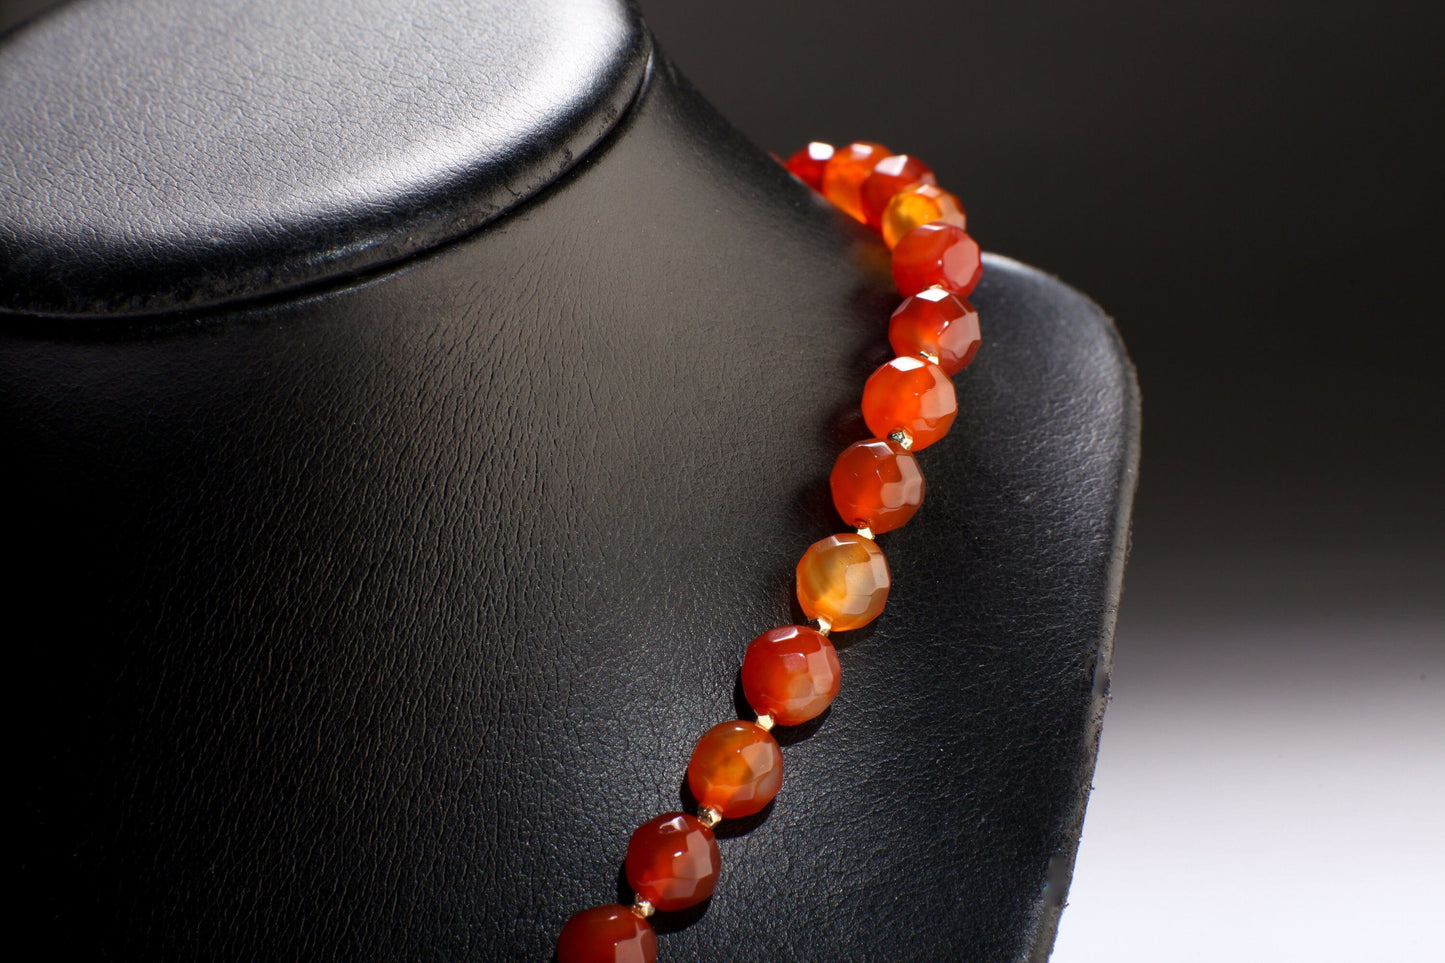 Carnelian Necklace, Natural Carnelian Faceted with Dangling Fire Agate Oval Pendant, Antiqued Gold Fancy Leaf Toggle Clasp,Gift 20&quot; Necklace